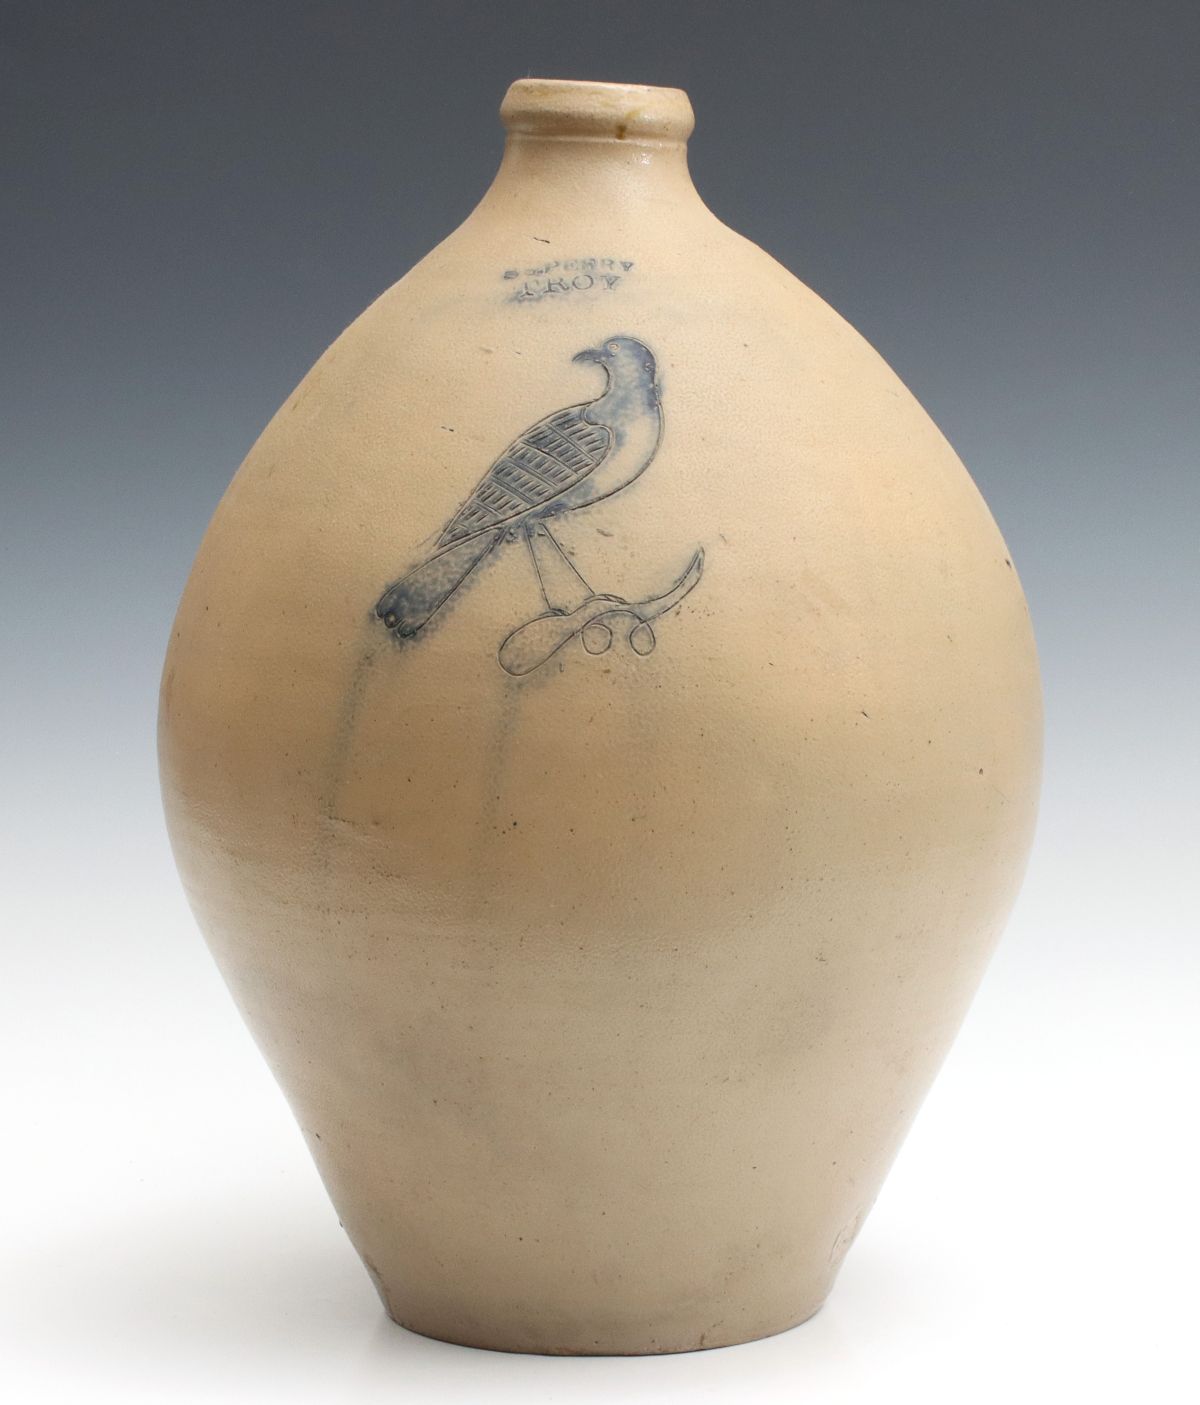 A 19TH C. OVOID JUG WITH ETCHED BIRD SIGNED S.S. PERRY